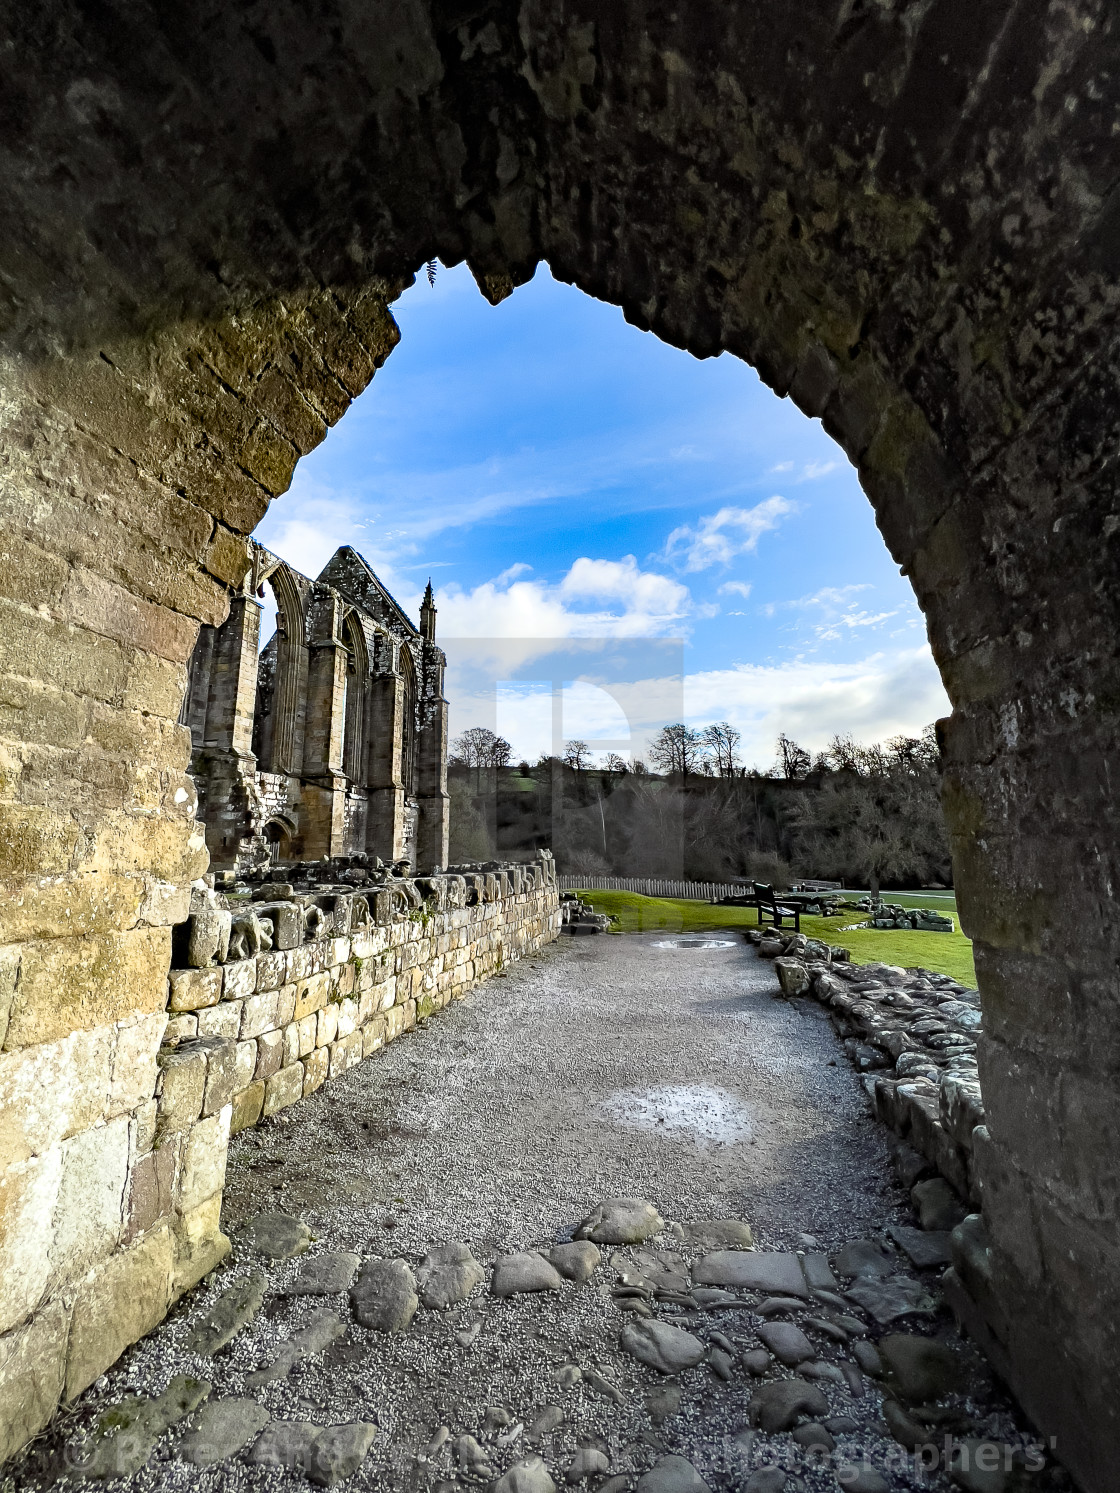 "Bolton Abbey, Priory Ruins, Yorkshire." stock image